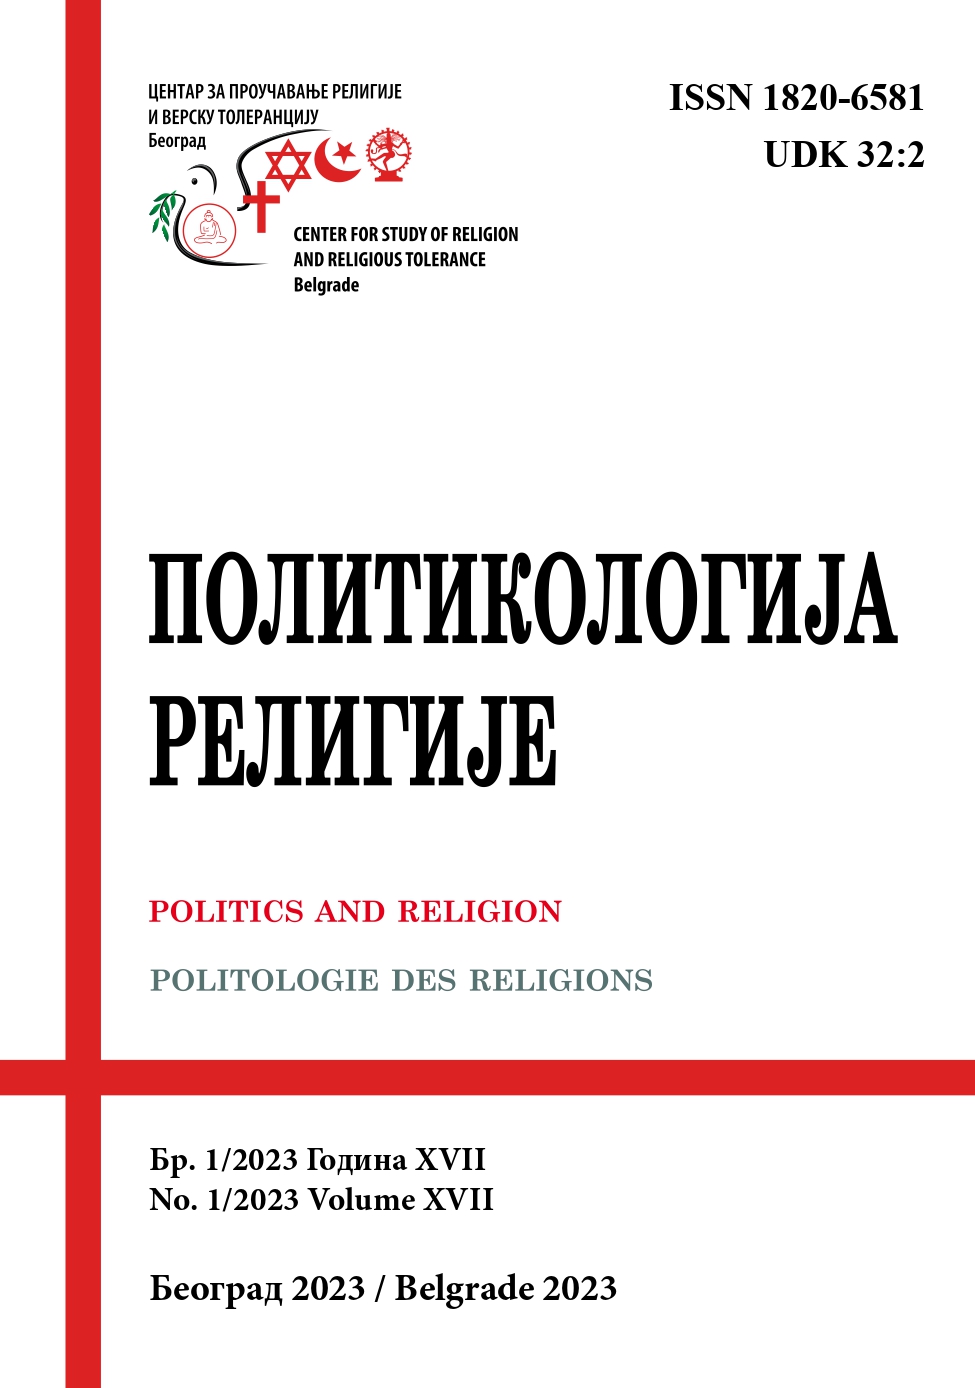 “THE POLITICS OF PROTESTANT CHURCHES ANDTHE PARTY-STATE IN CHINA: GOD ABOVE PARTY?” Cover Image